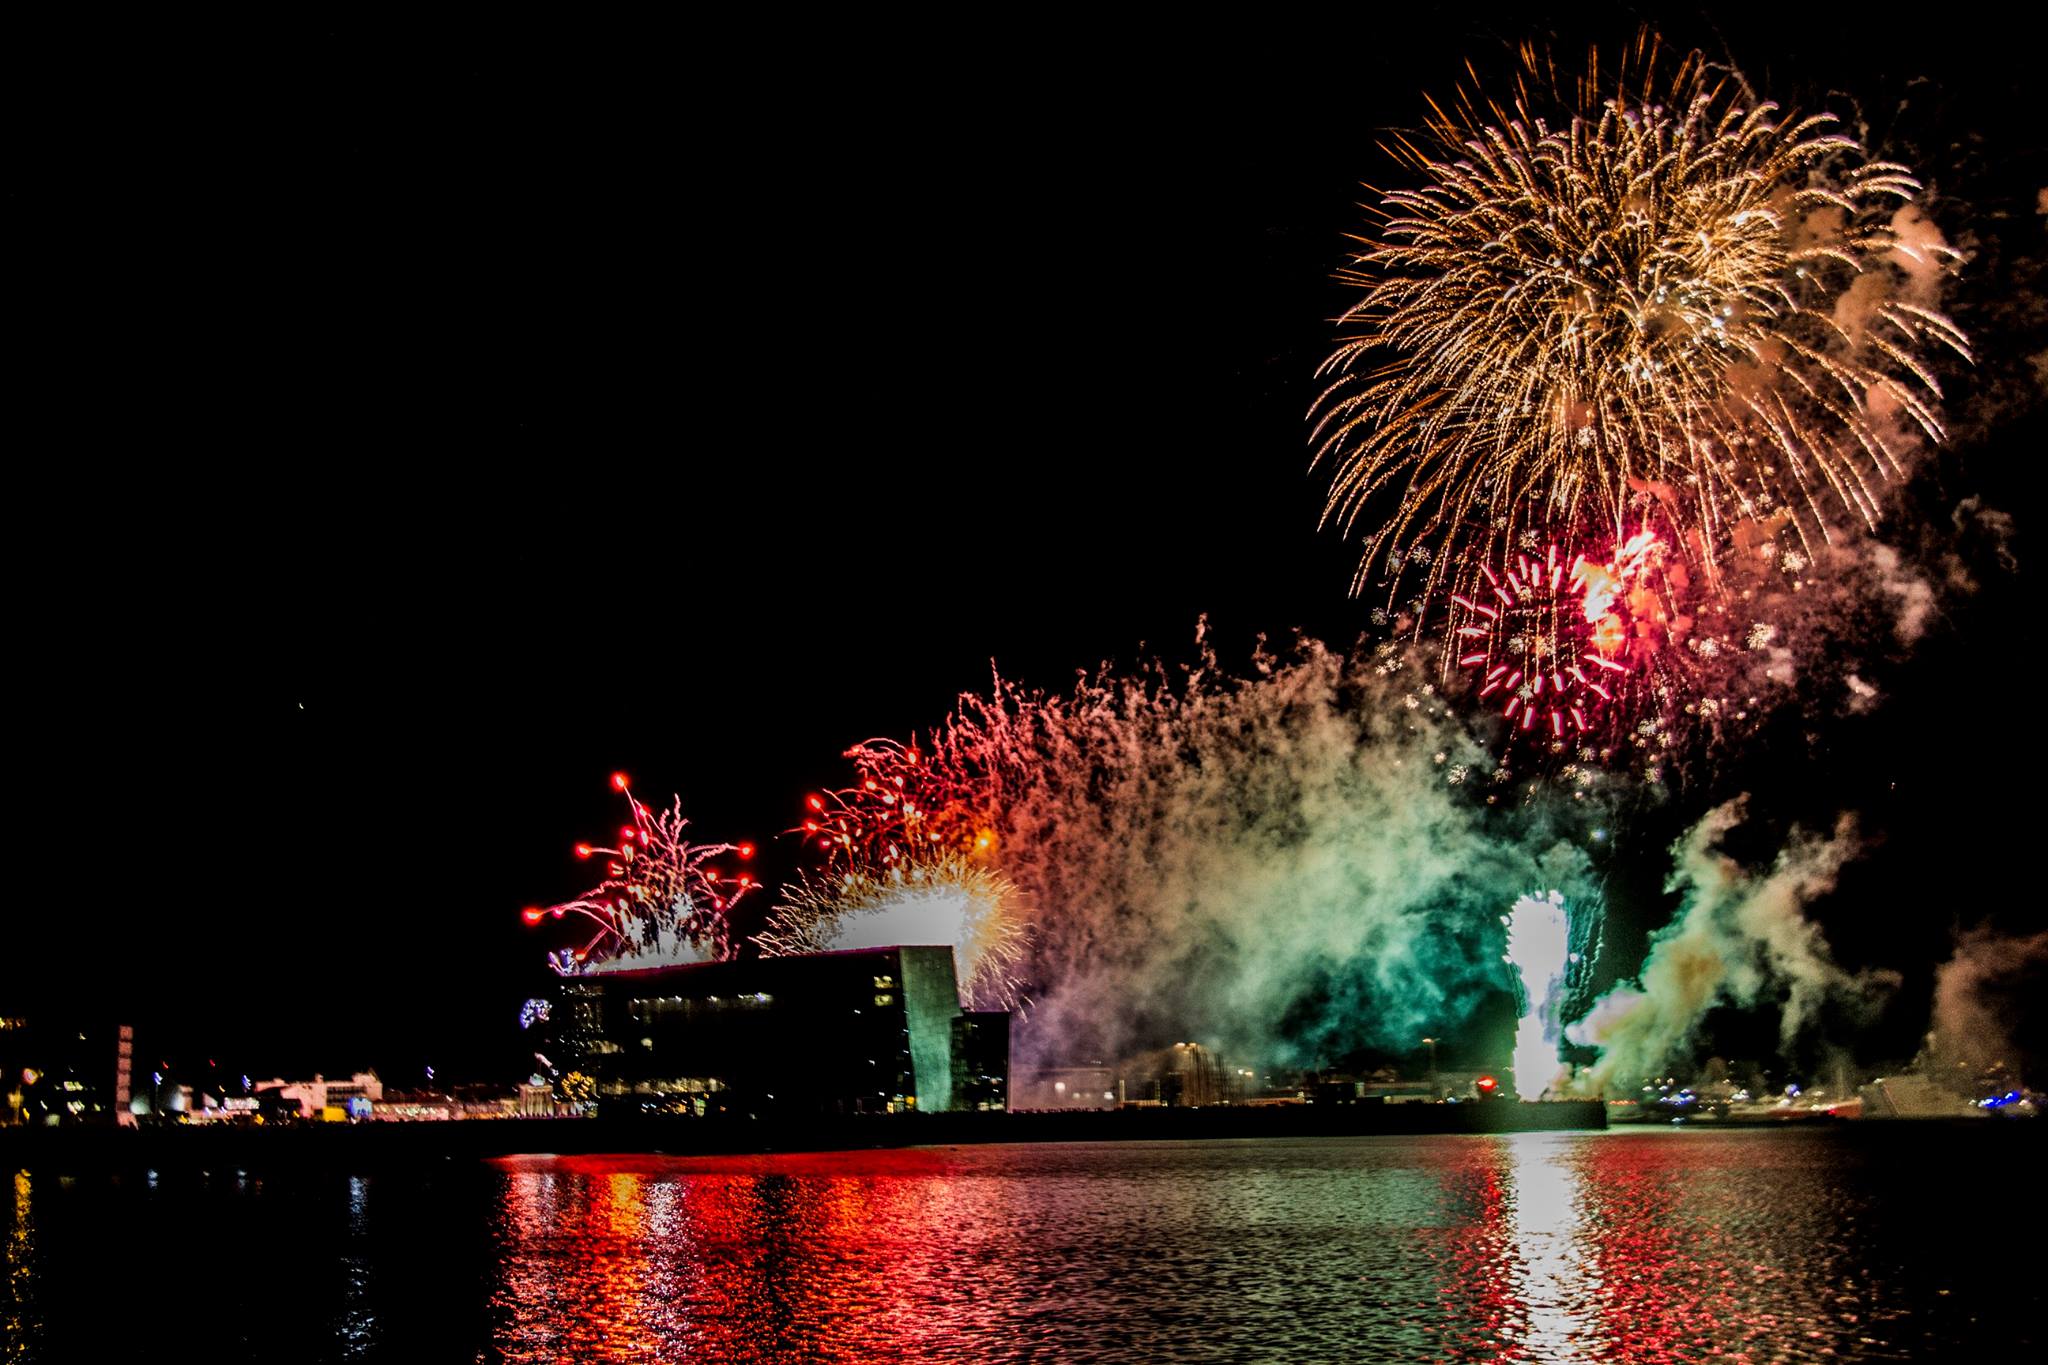 Fireworks during New Year's in Iceland casting their lights on Harpa Concert Hall.